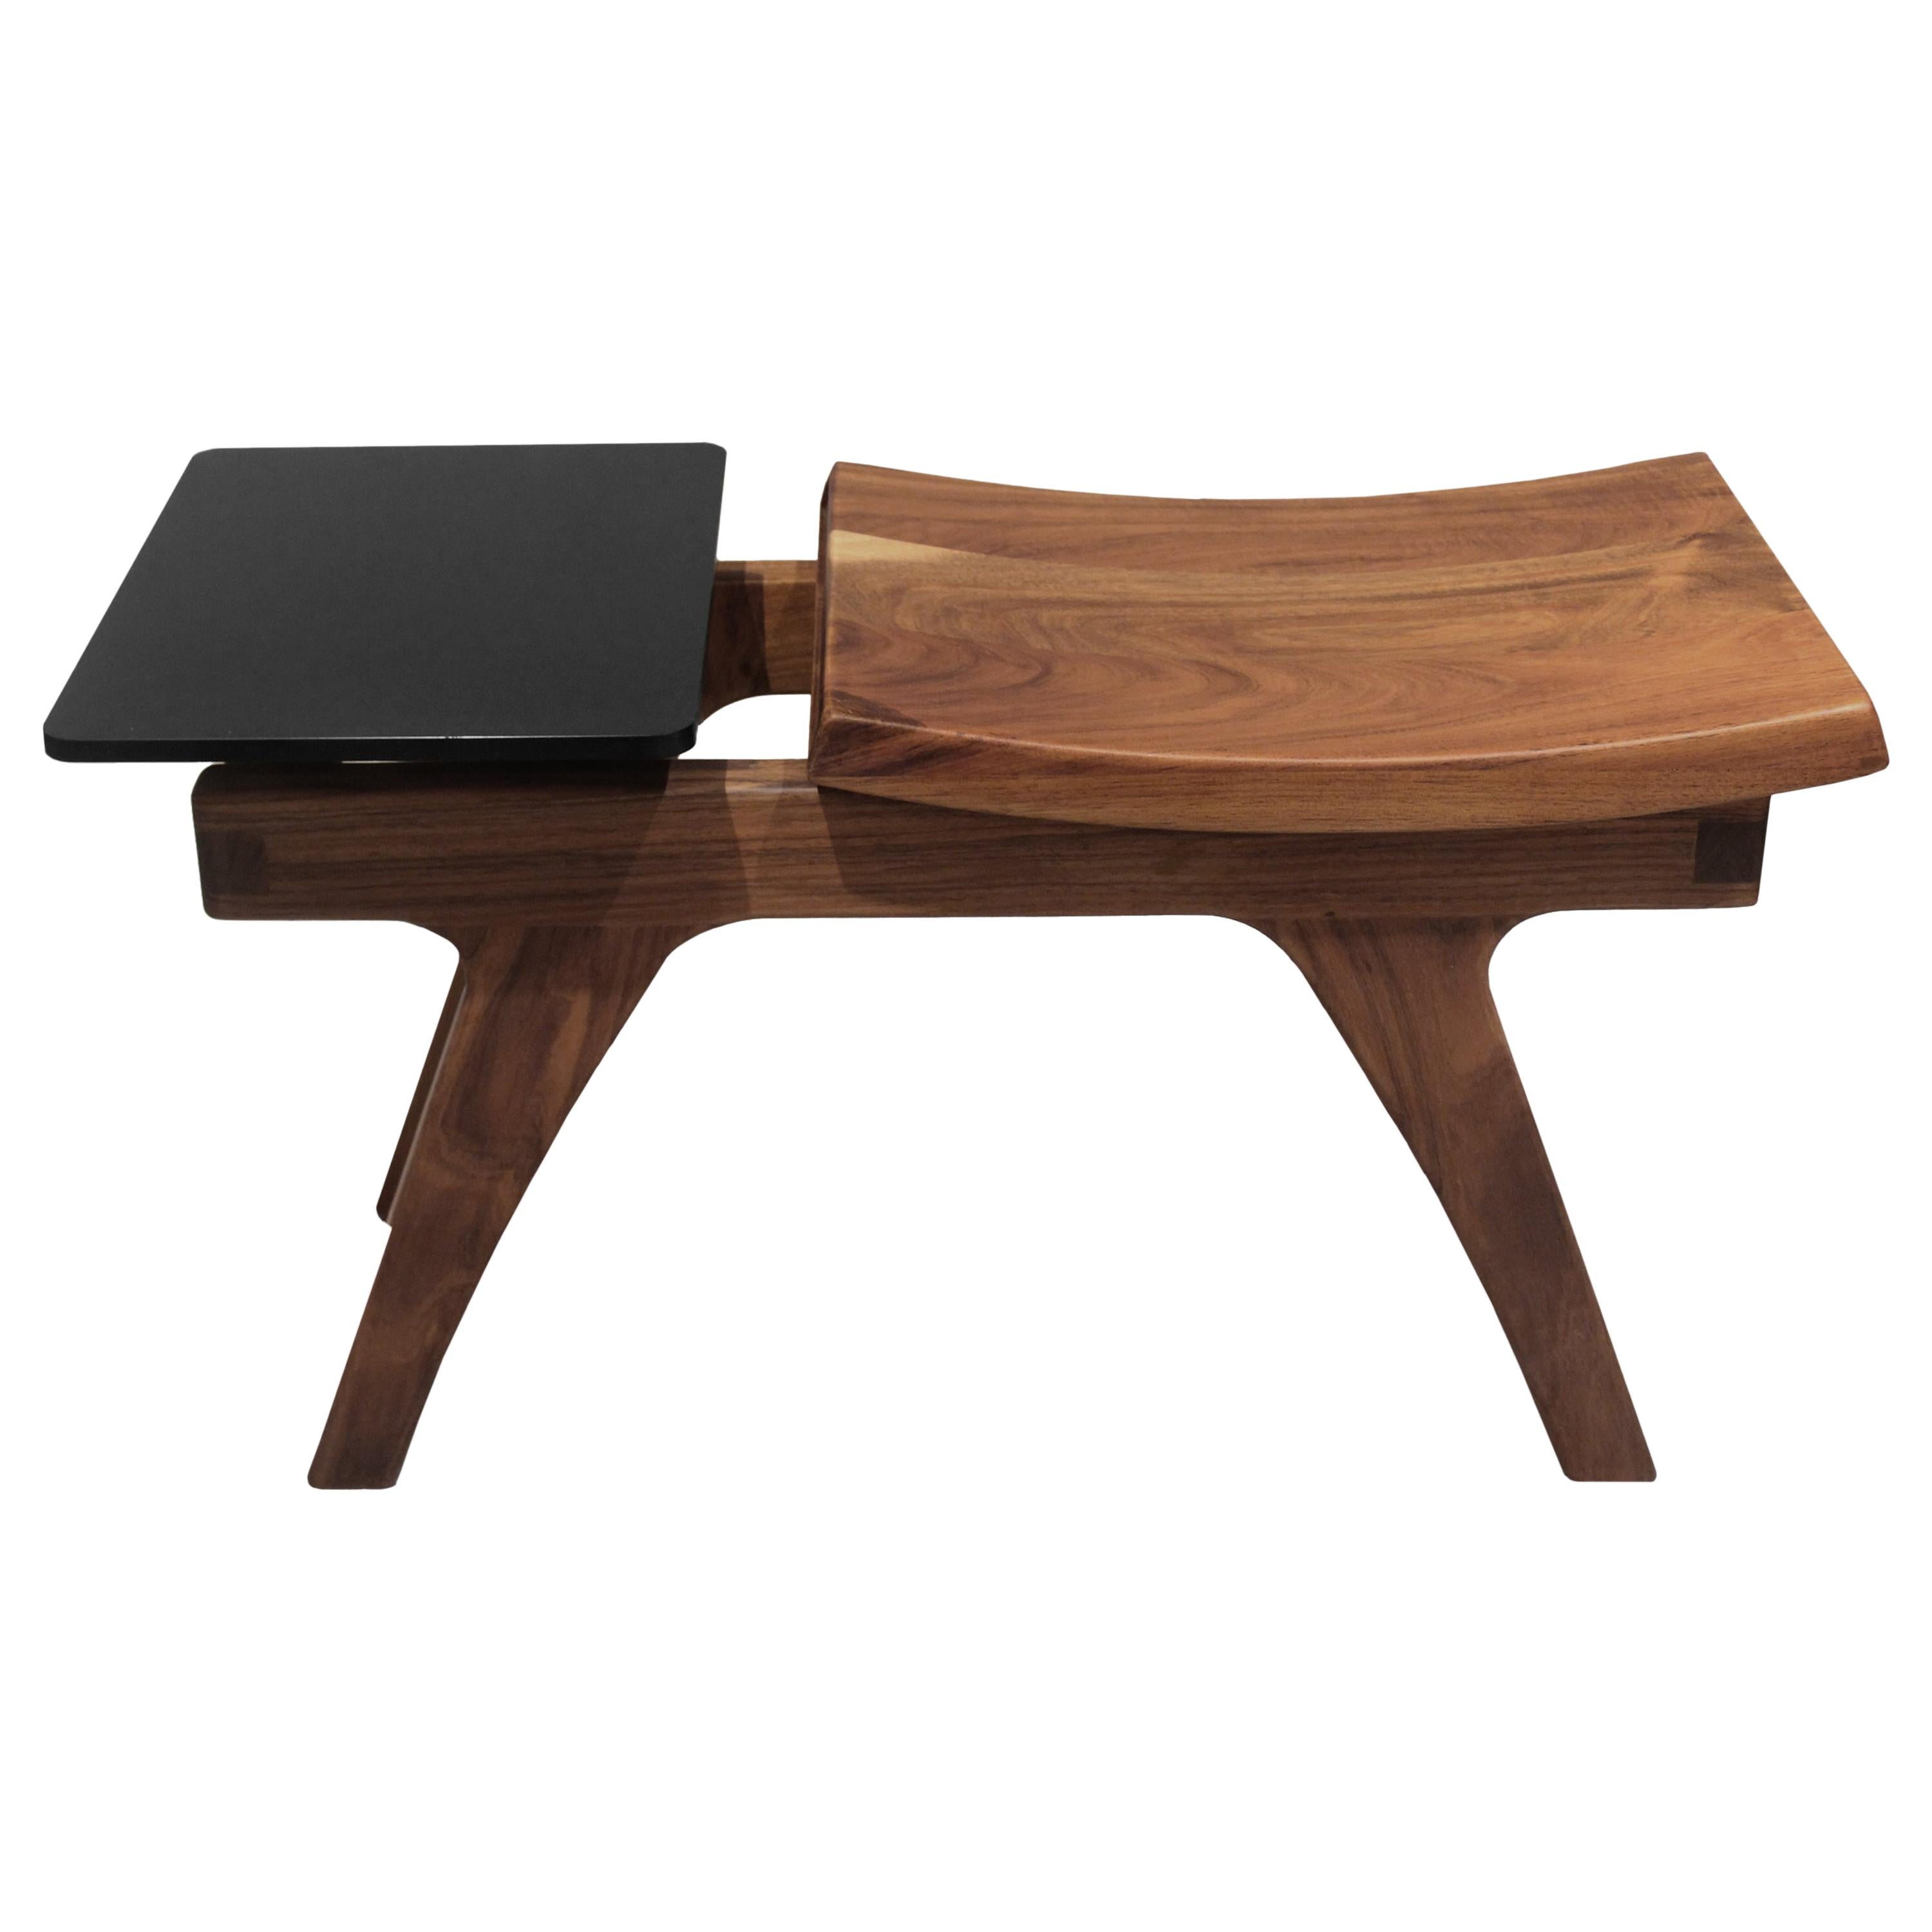 Tripot, Solid Walnut Wood Bench, Stool with One Seats